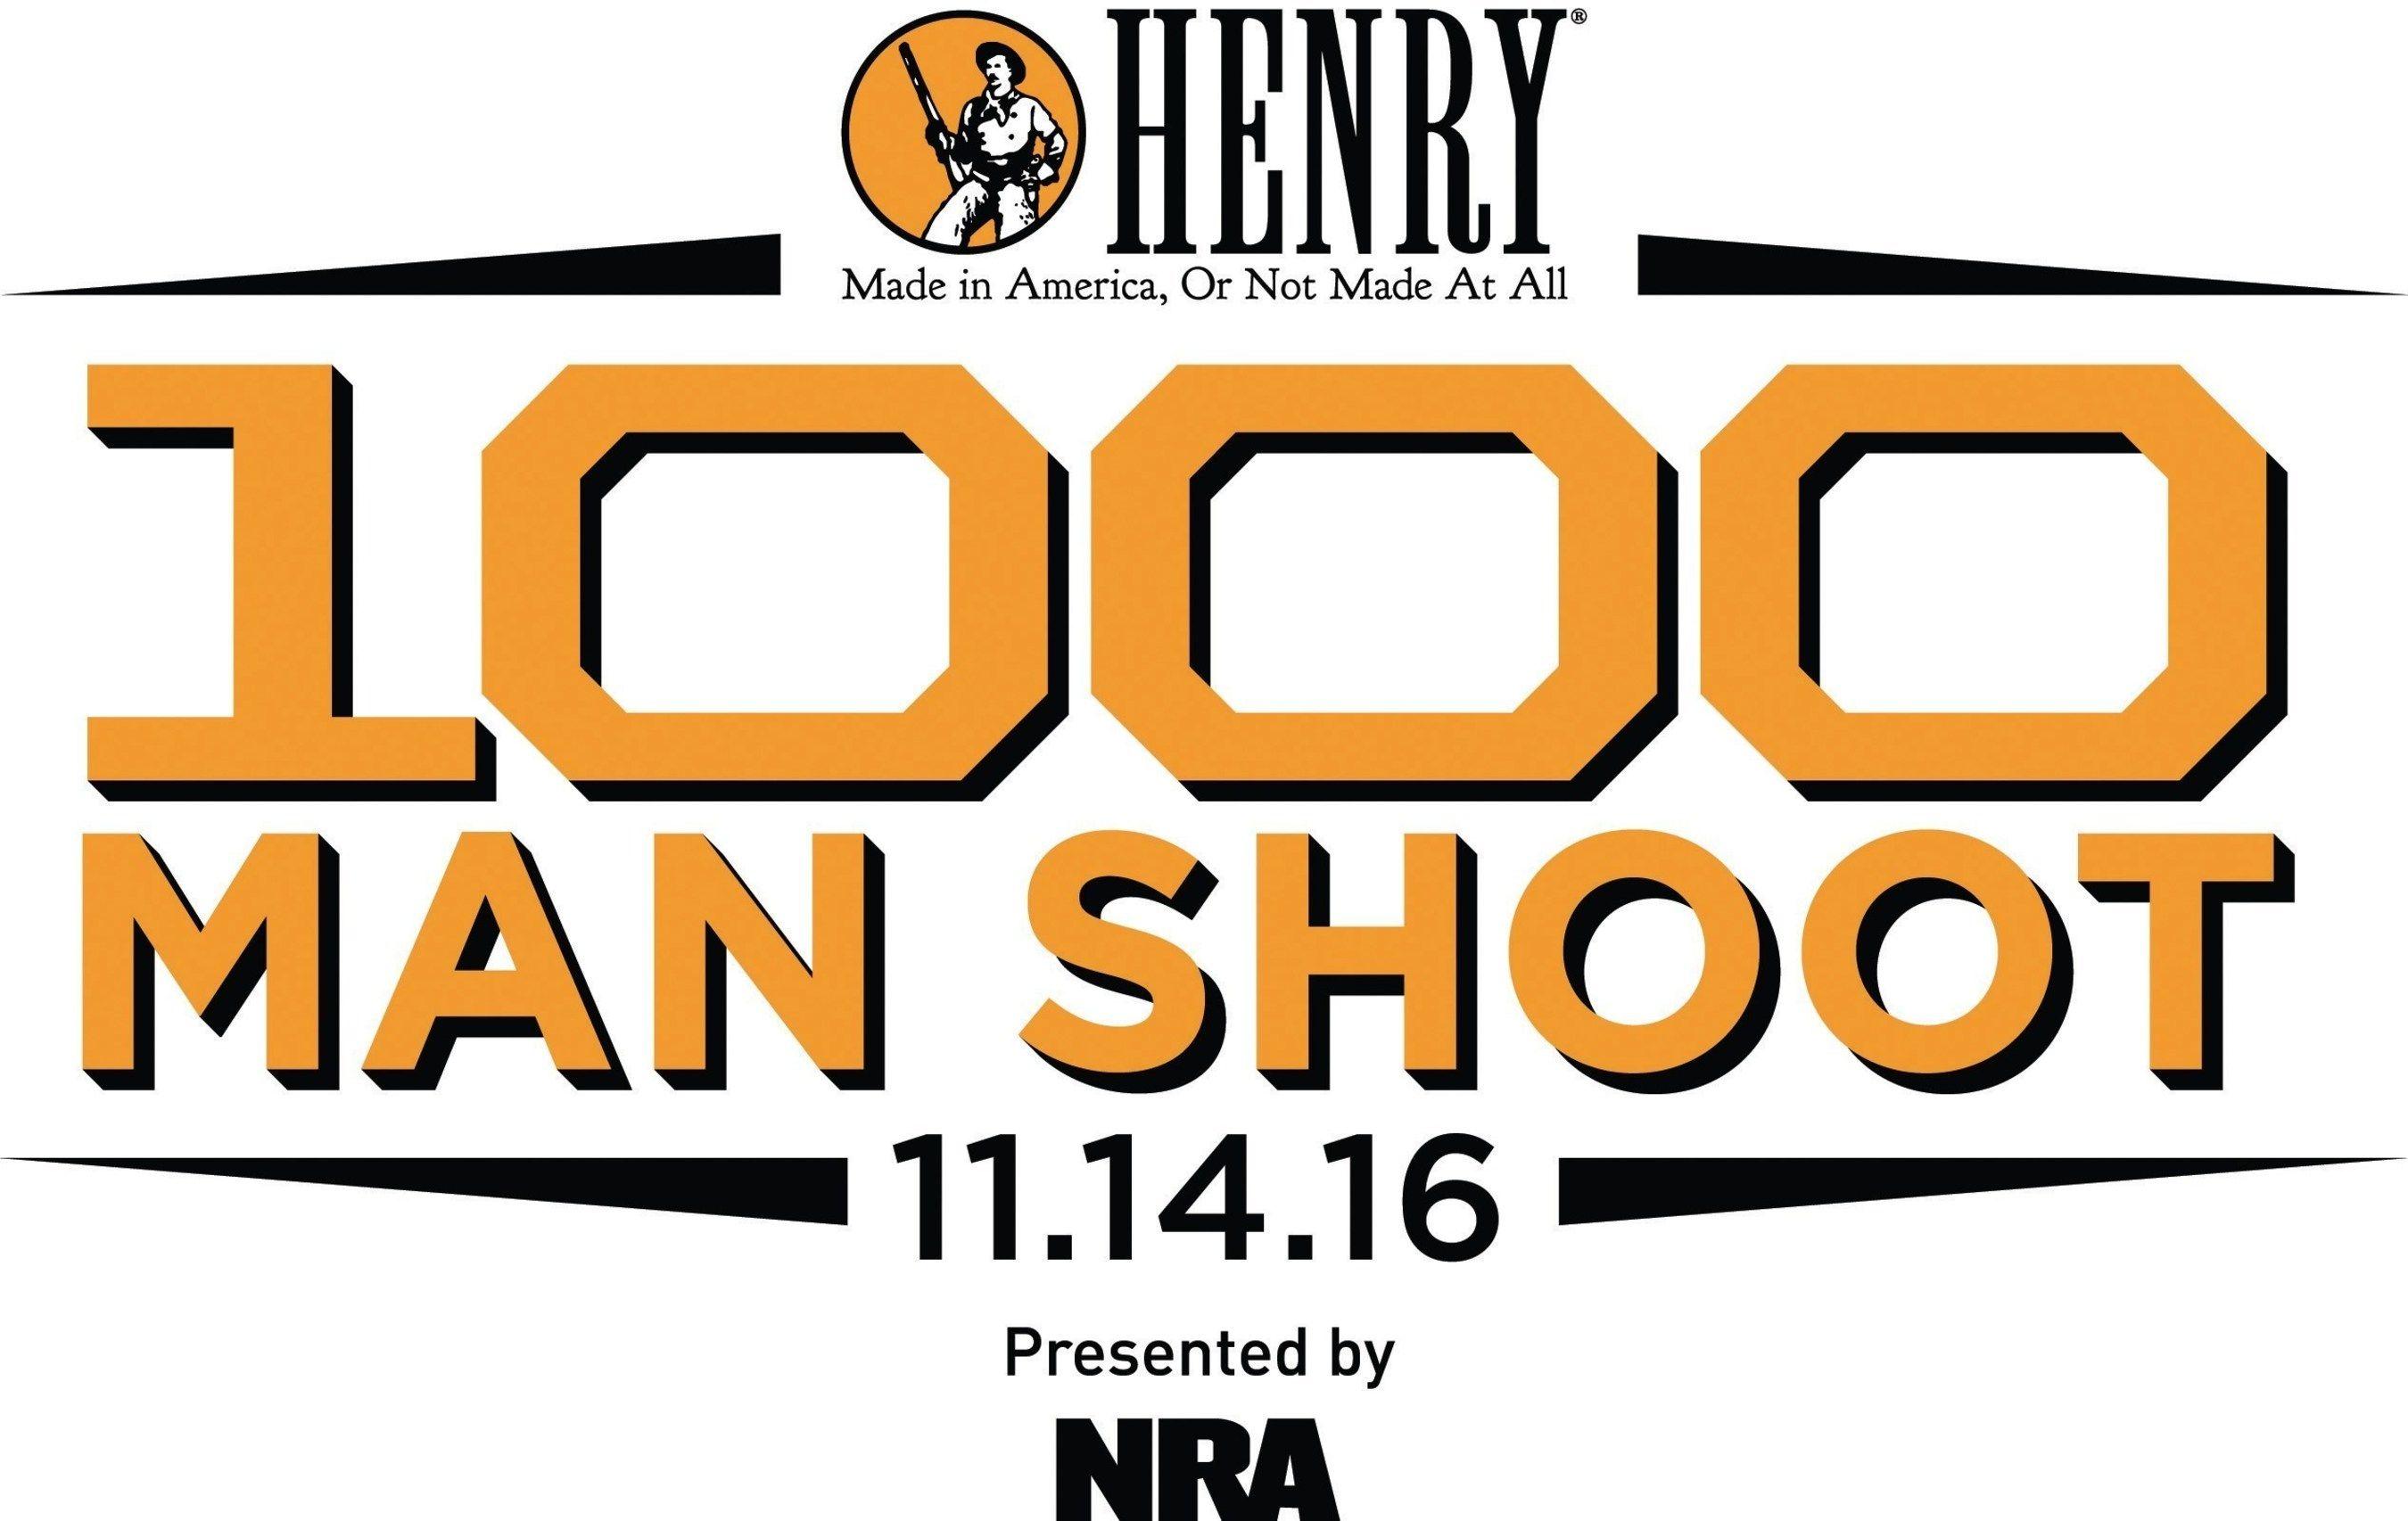 Henry Arms Logo - The Henry 1000 Man Shoot To Benefit